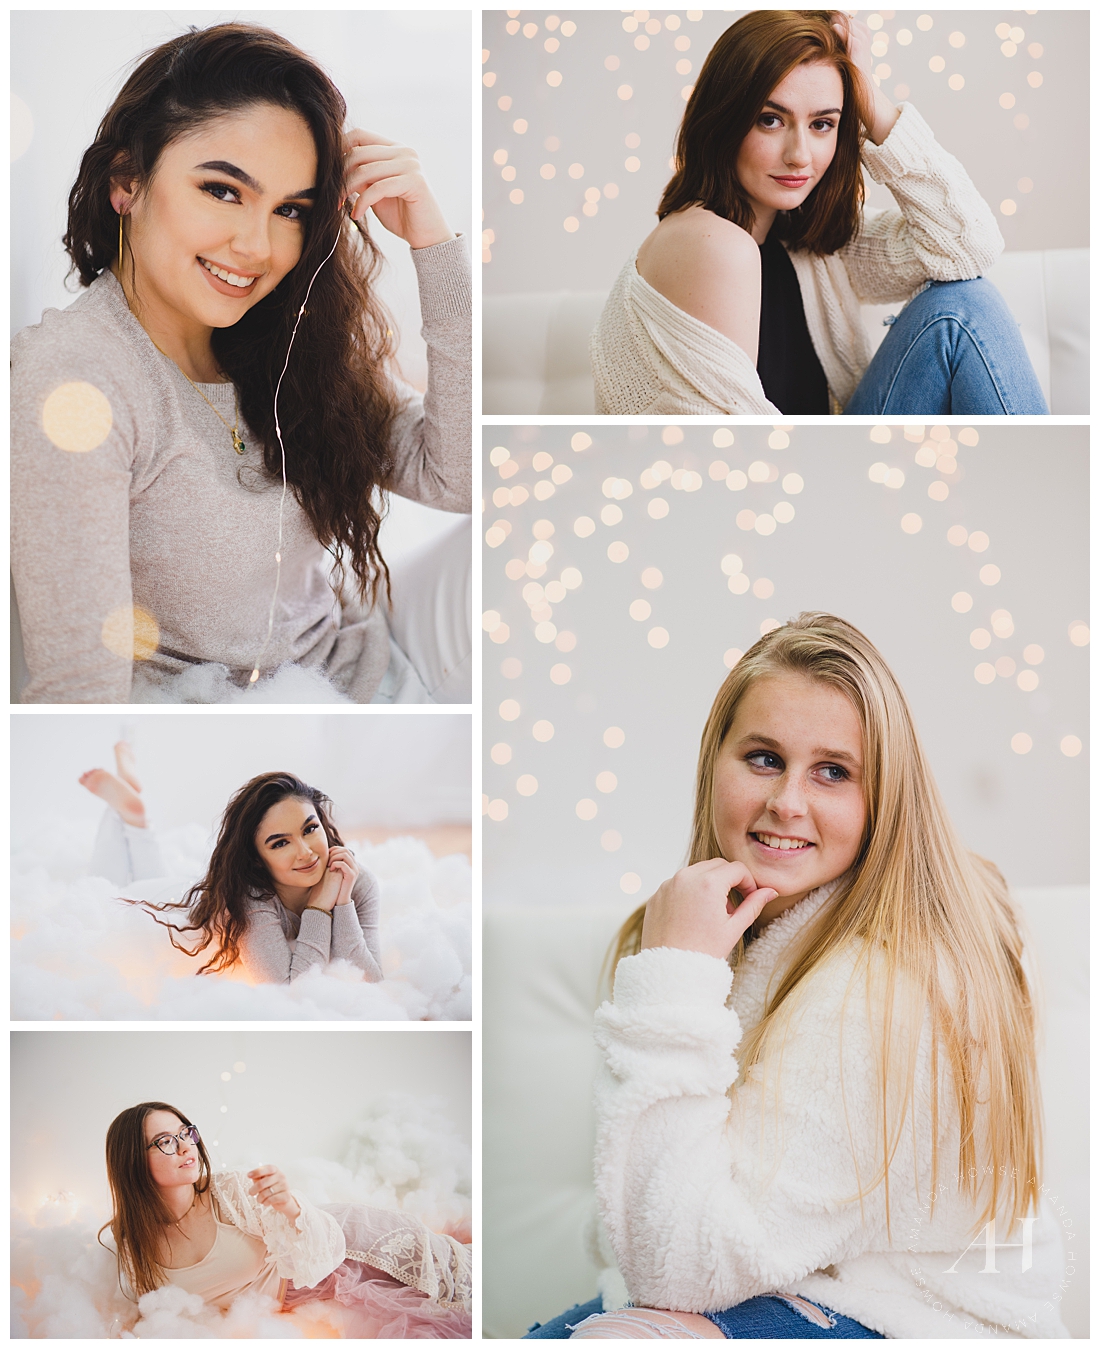 Dreamy Senior Portraits with White Backdrop and String Lights | Photographed by Tacoma's Best High School Senior Photographer Amanda Howse